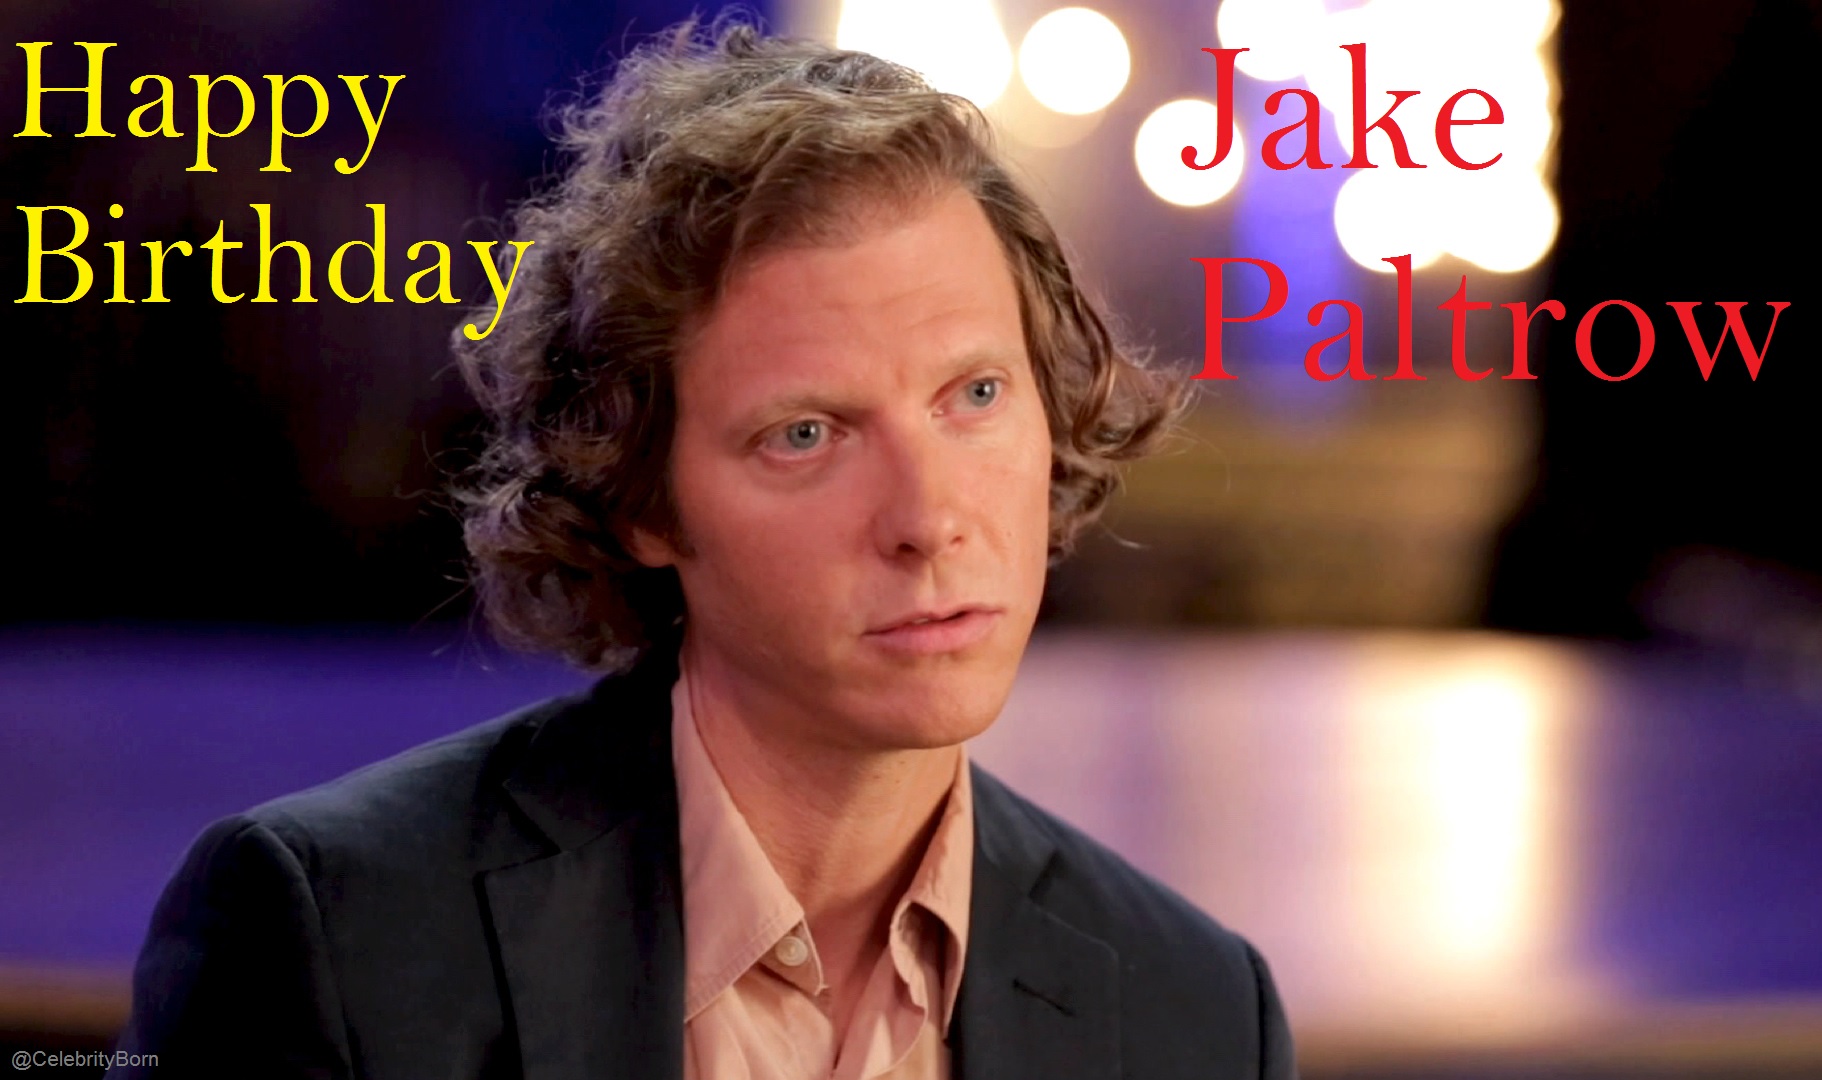 Happy Birthday to Jake Paltrow (American Film Director, Screenwriter, Television Director & Film Actor) 